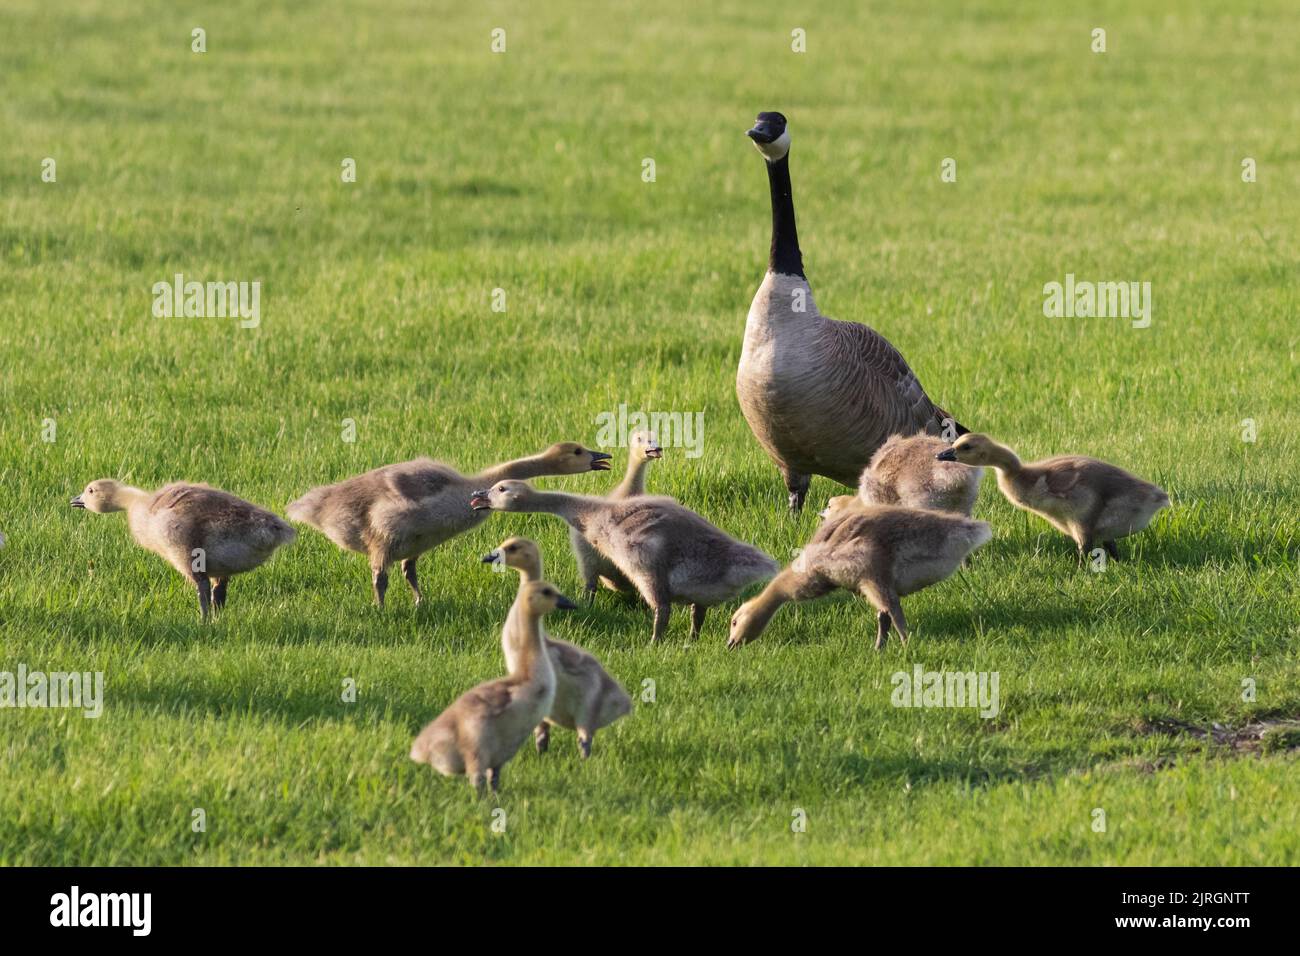 Canada geese with young at the Nature Discovery Sanctuary in Winkler, Manitoba, Canada. Stock Photo